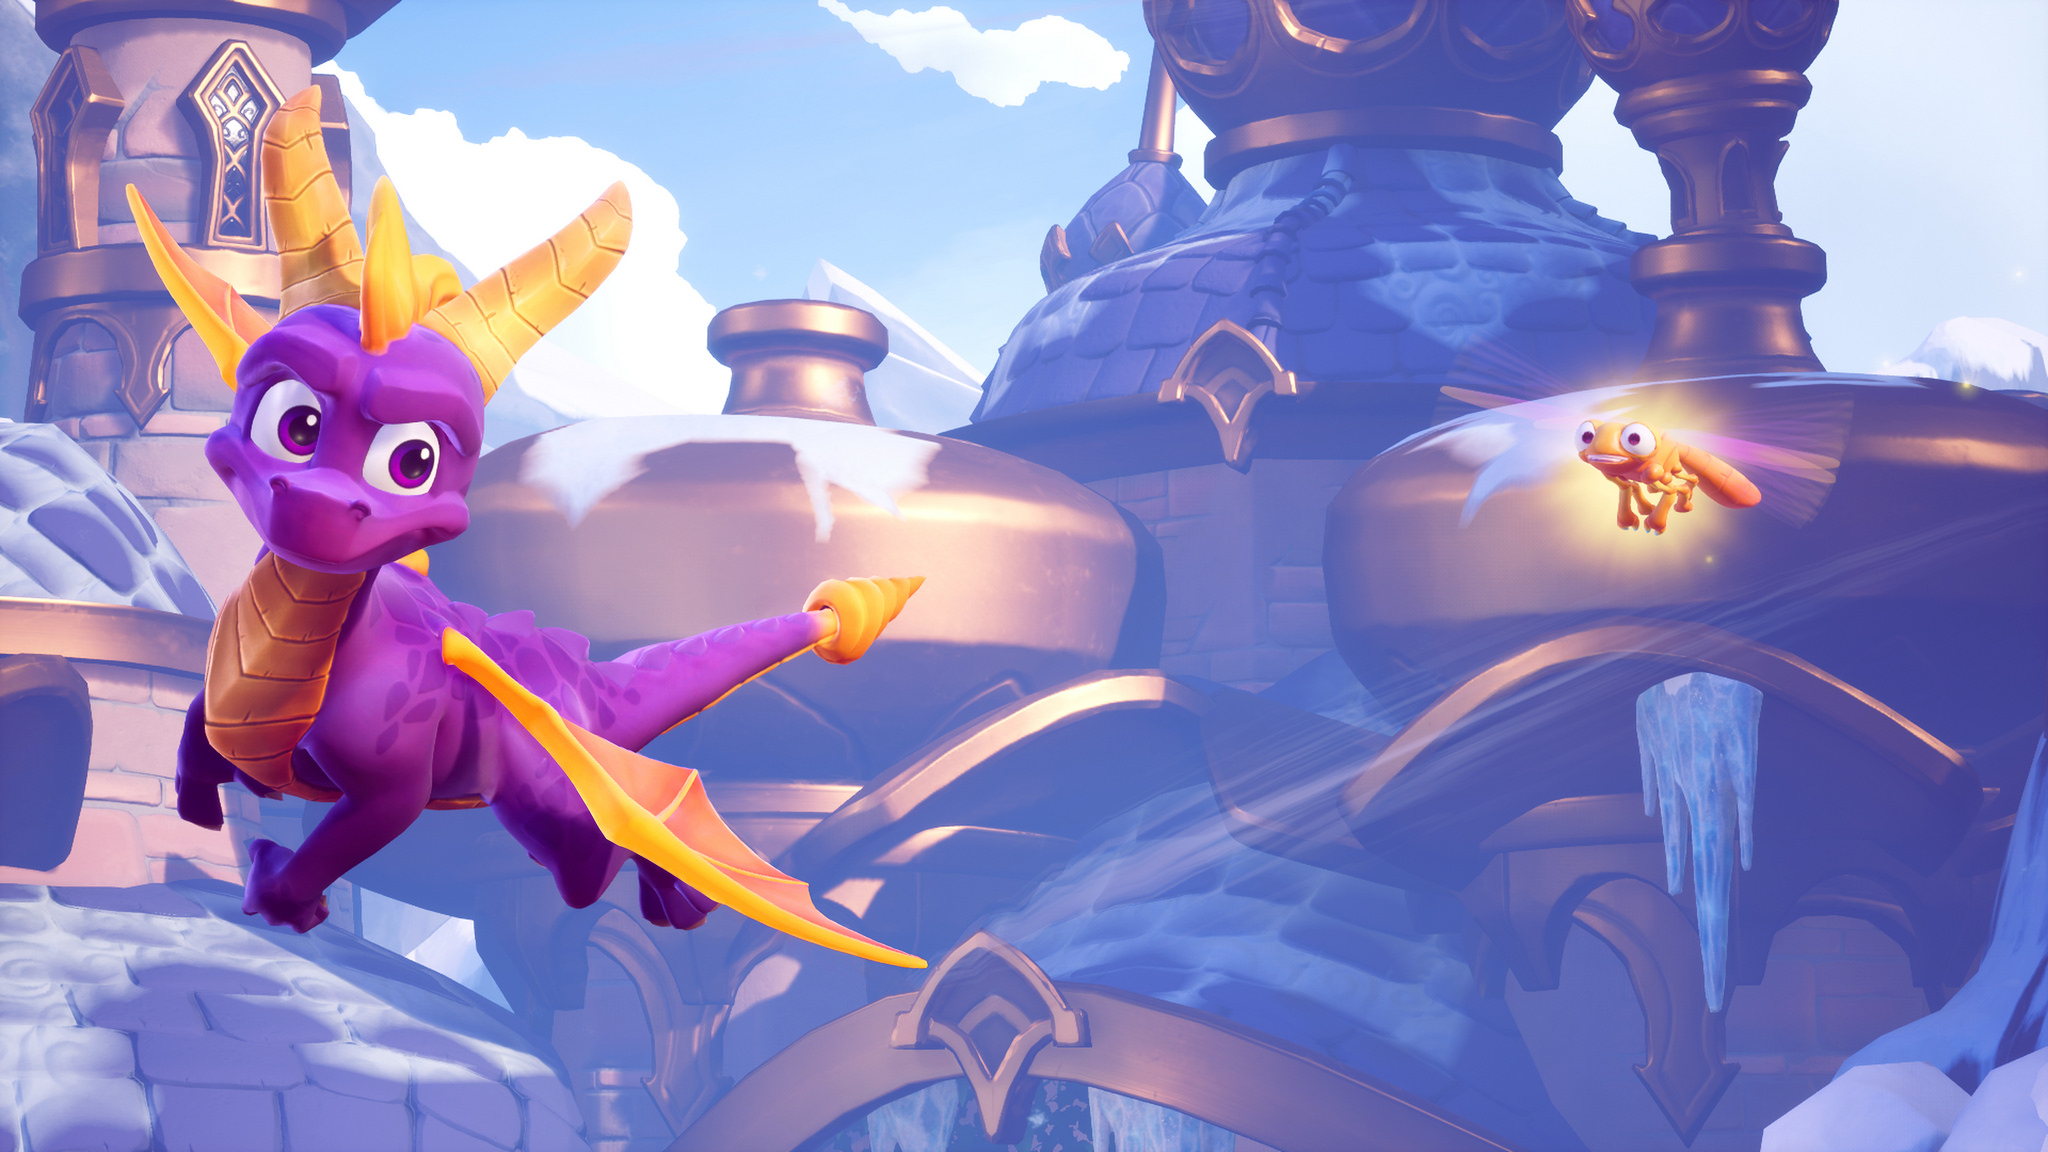 2048x1152 Spyro Reignited Trilogy Announced, Launching Late September for PS4 and Xbox One &acirc;&#128;&#148; The Nobeds